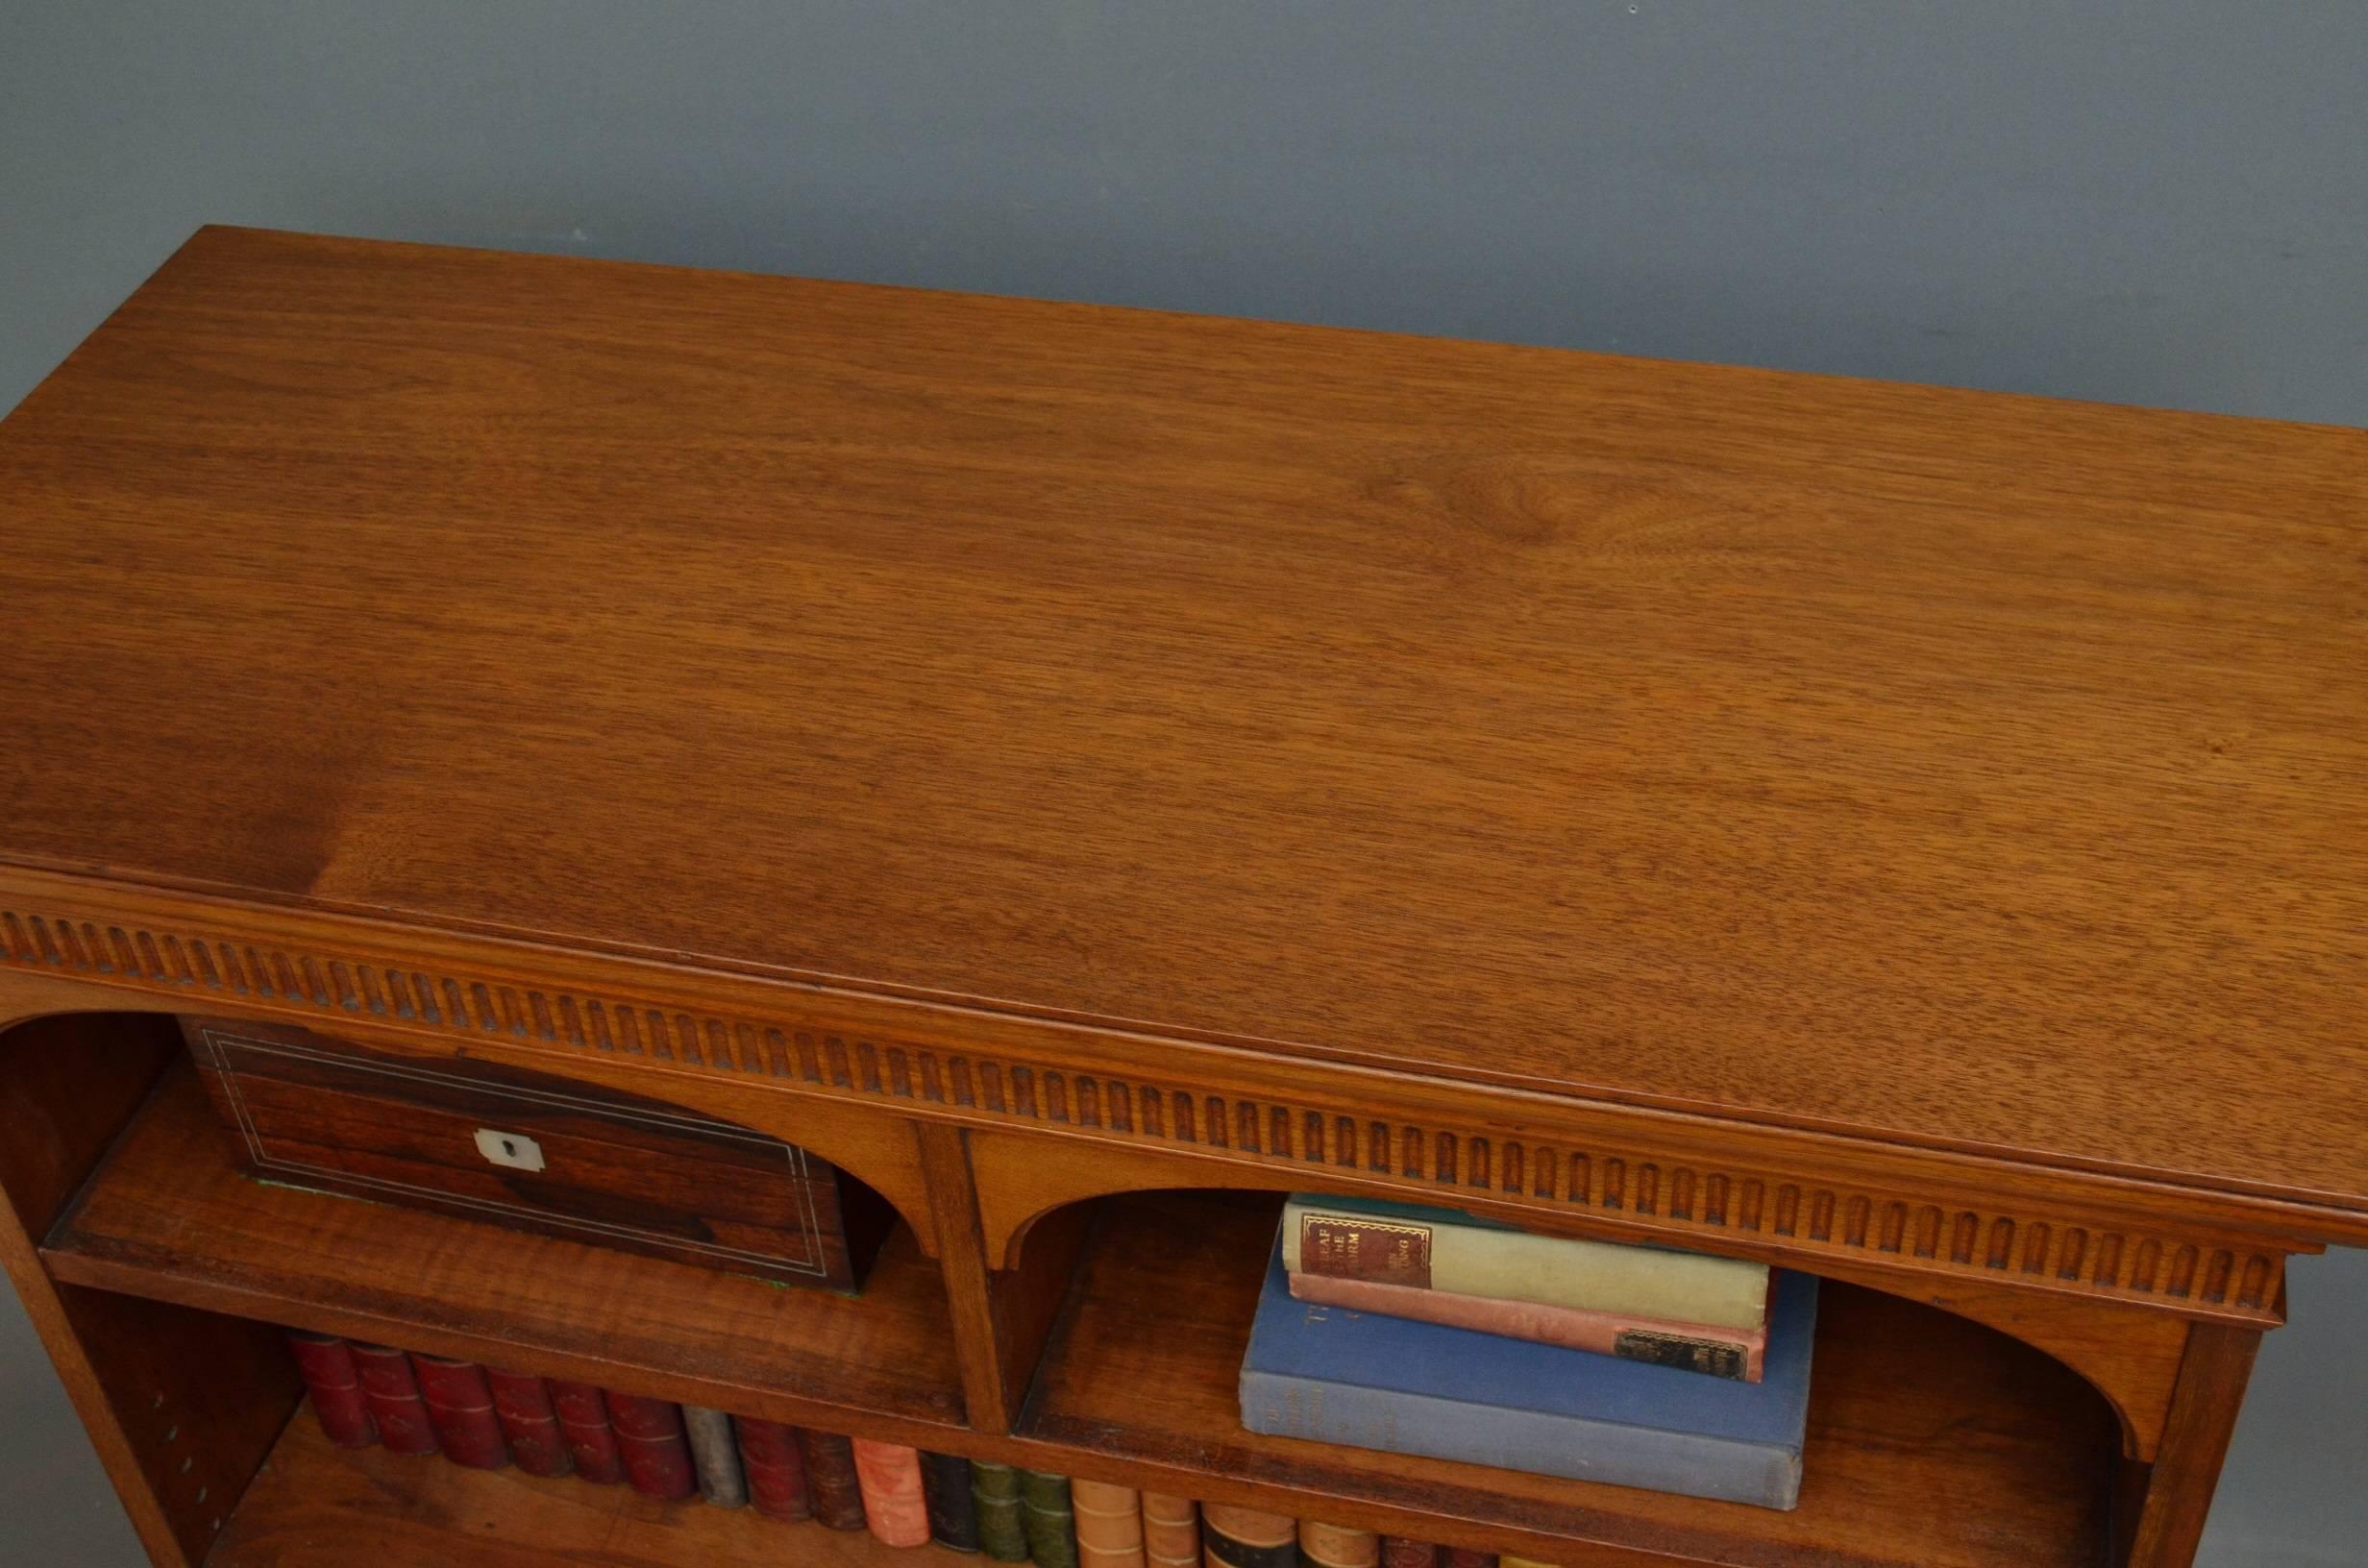 Sn3853, a good example of Victorian solid walnut dwarf bookcase, having attractive figured top with fluted frieze, 2 arched divisions and height adjustable shelf, all standing on moulded plinth base. This low bookcase has been sympathetically